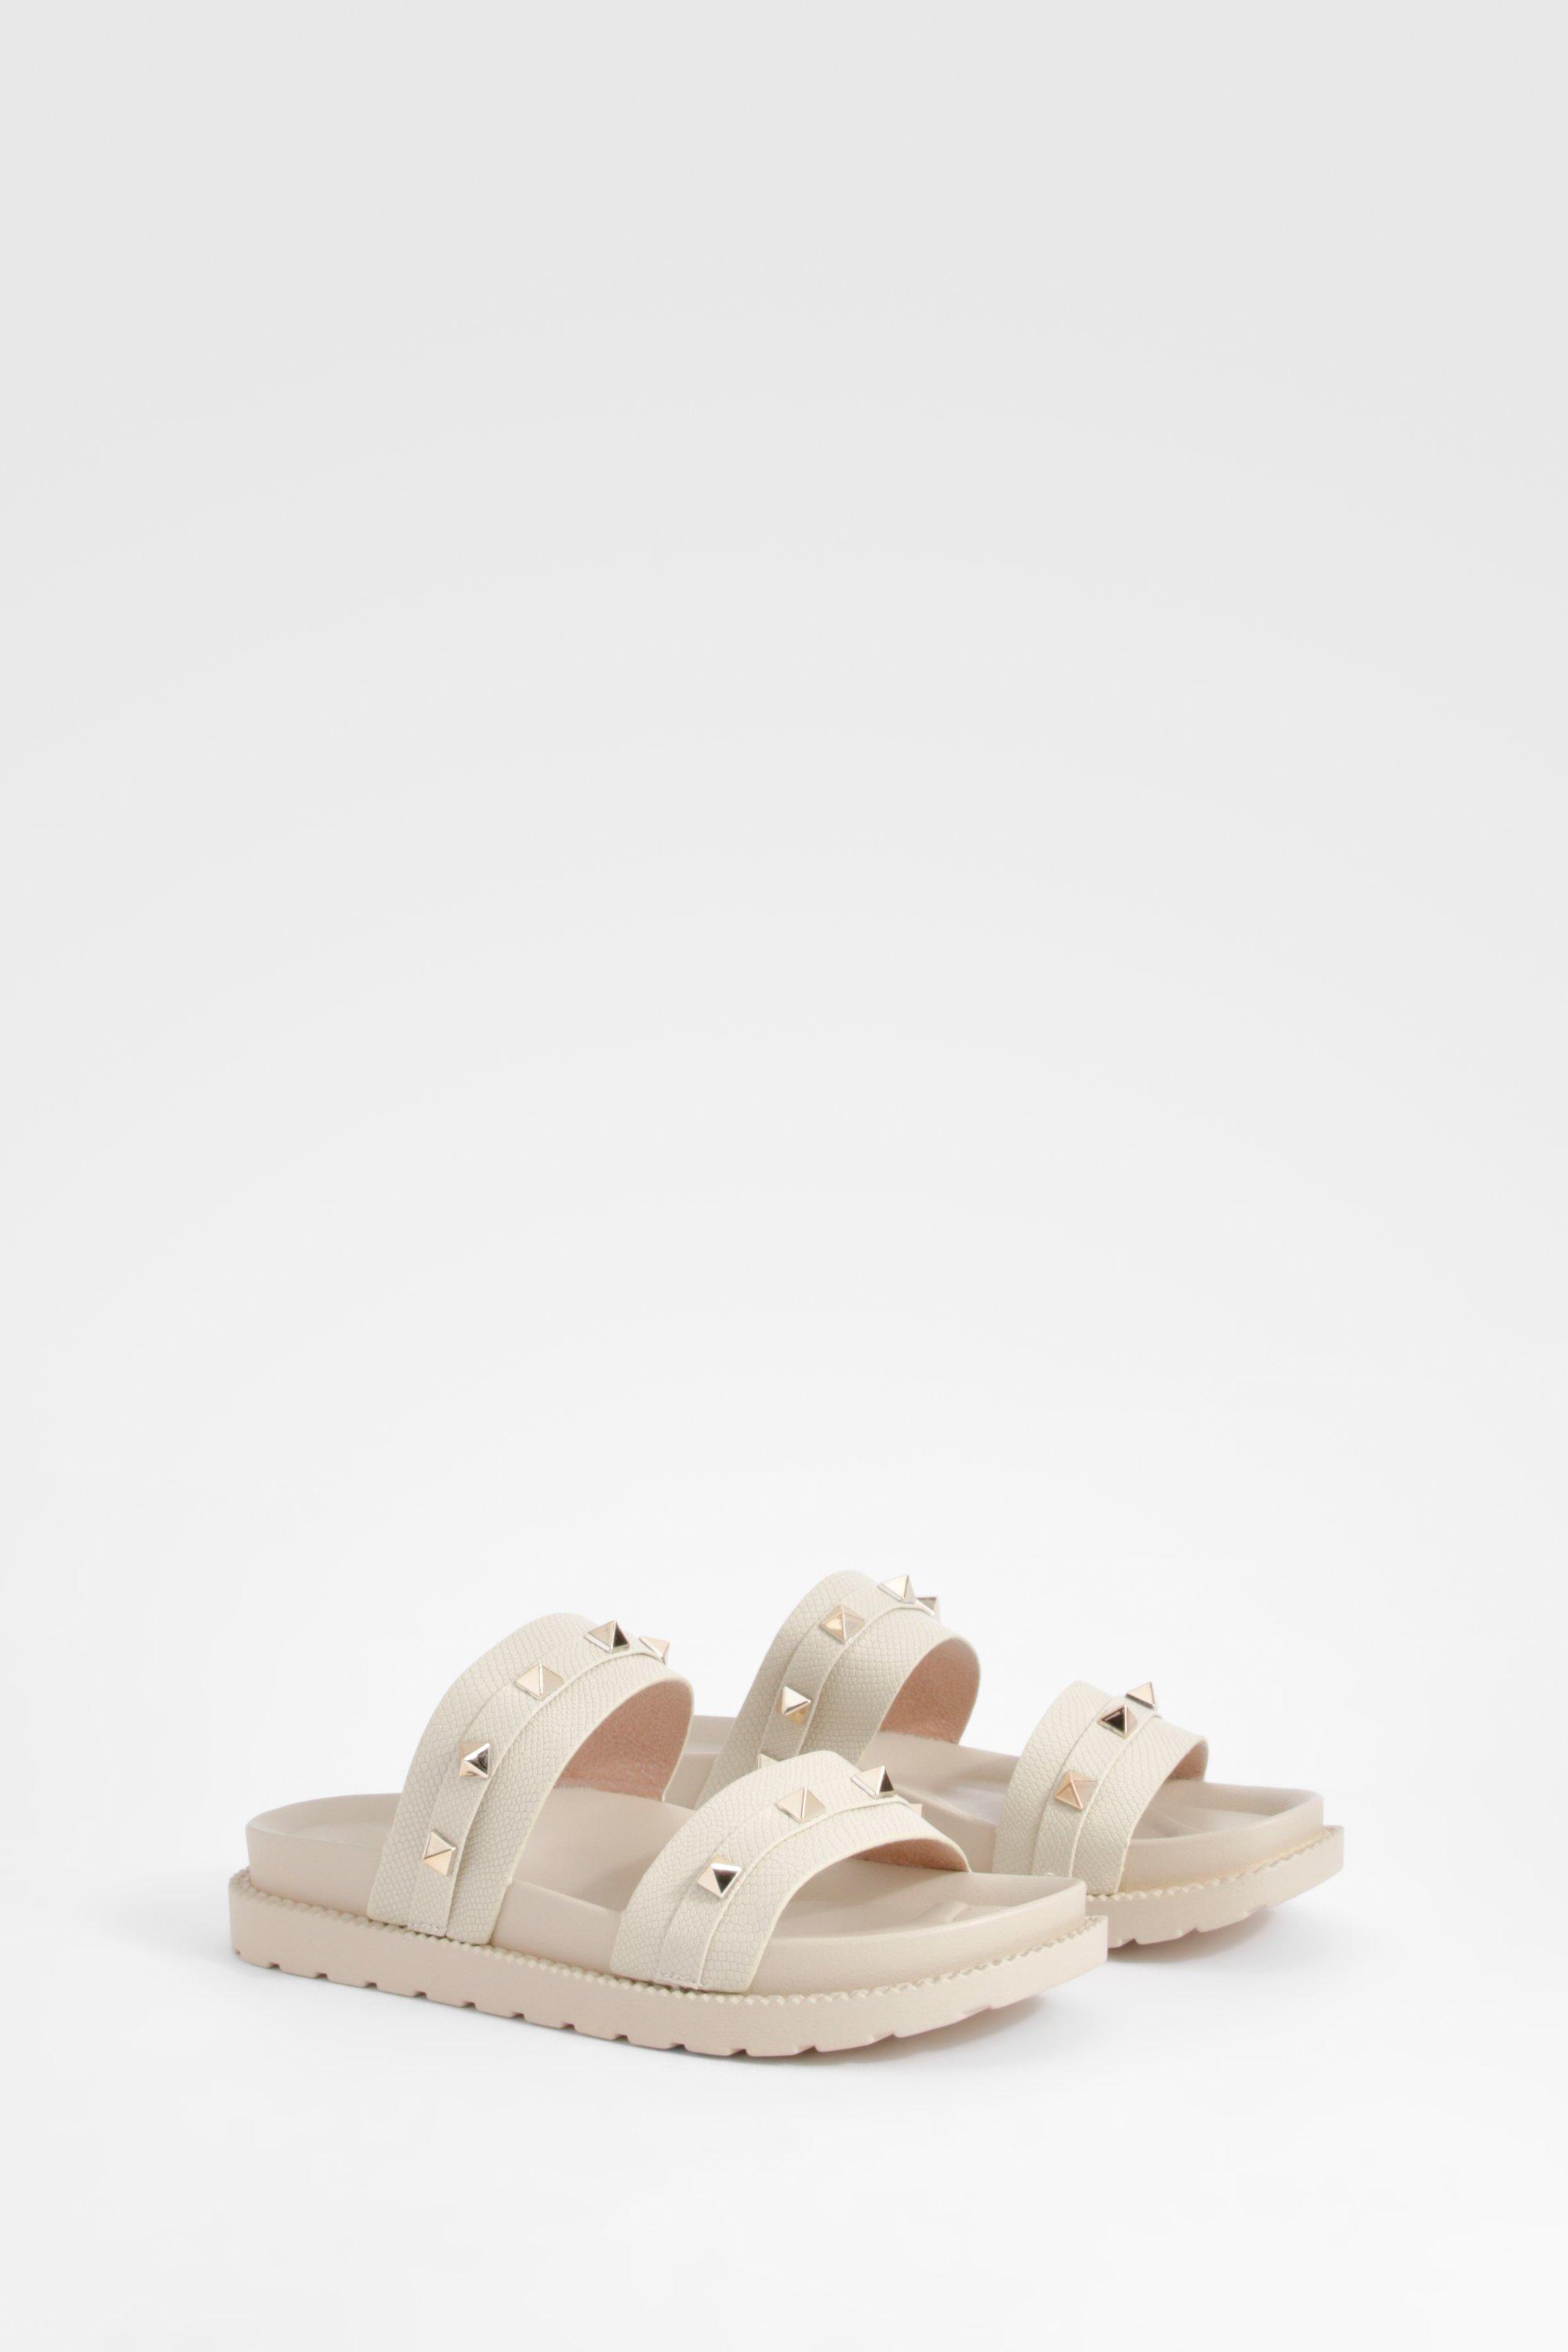 Image of Stud Detail Double Strap Sliders, Bianco